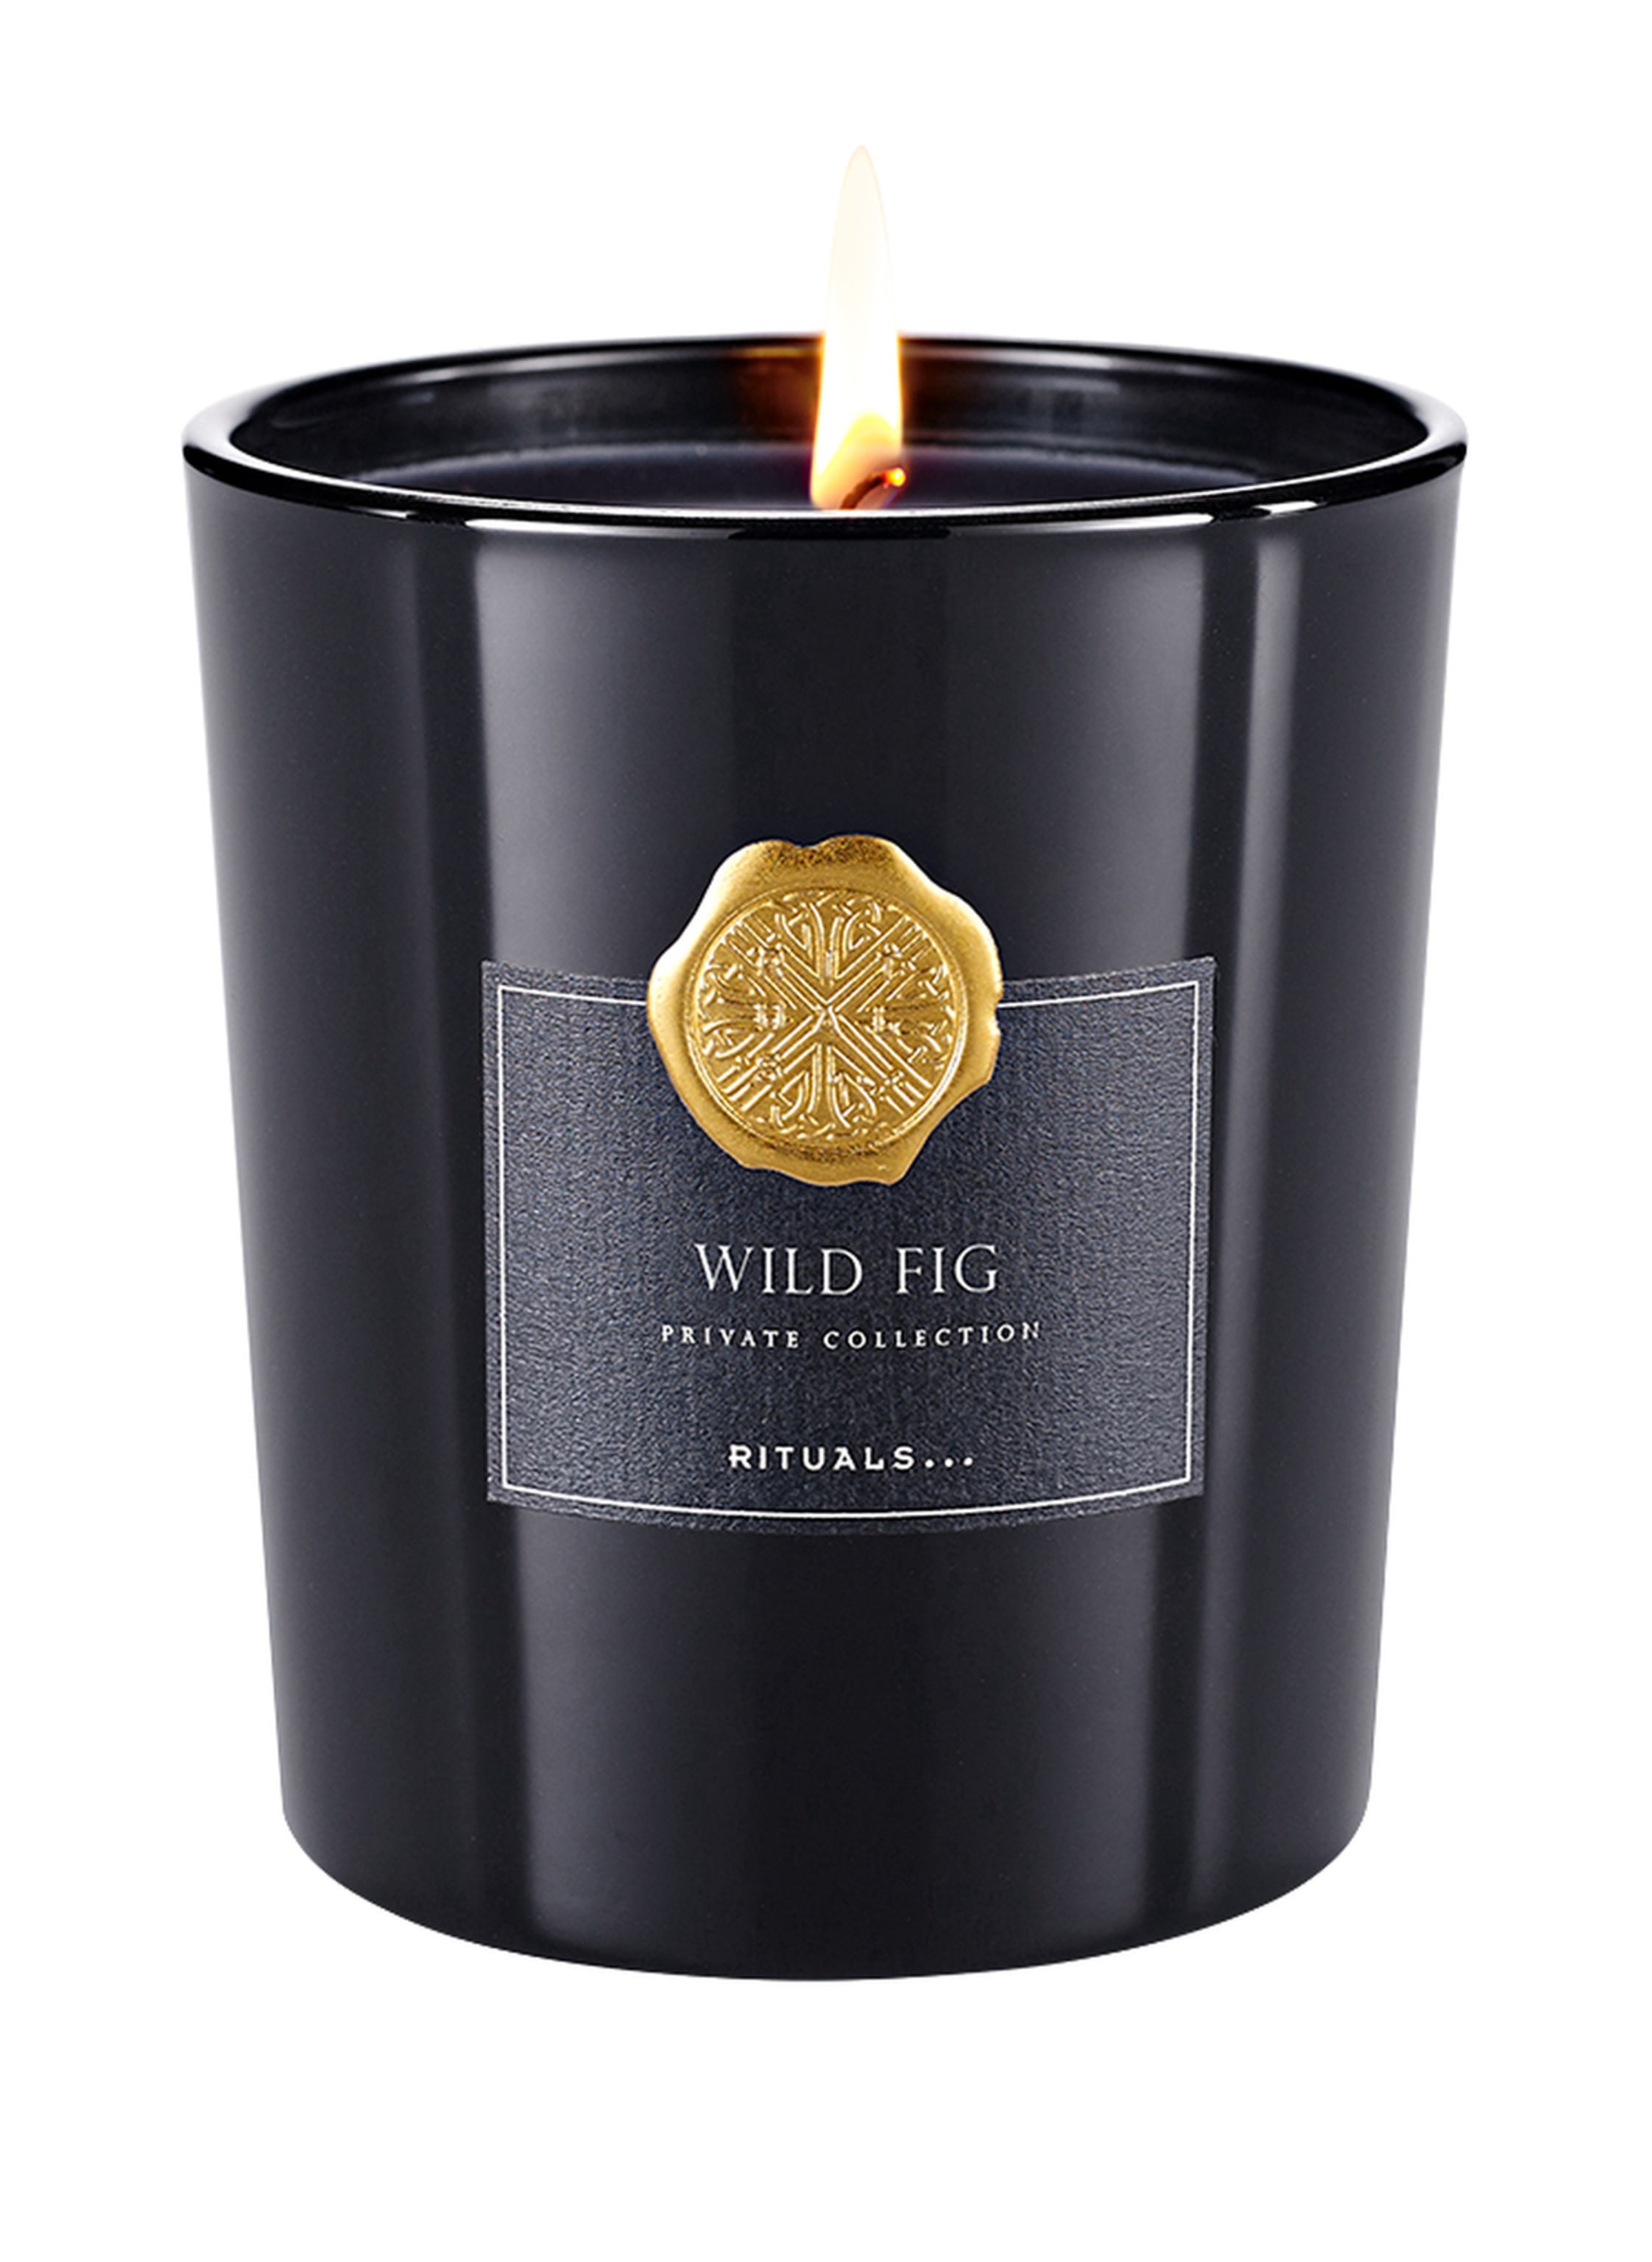 RITUALS WILD FIG SCENTED CANDLE Duftkerze